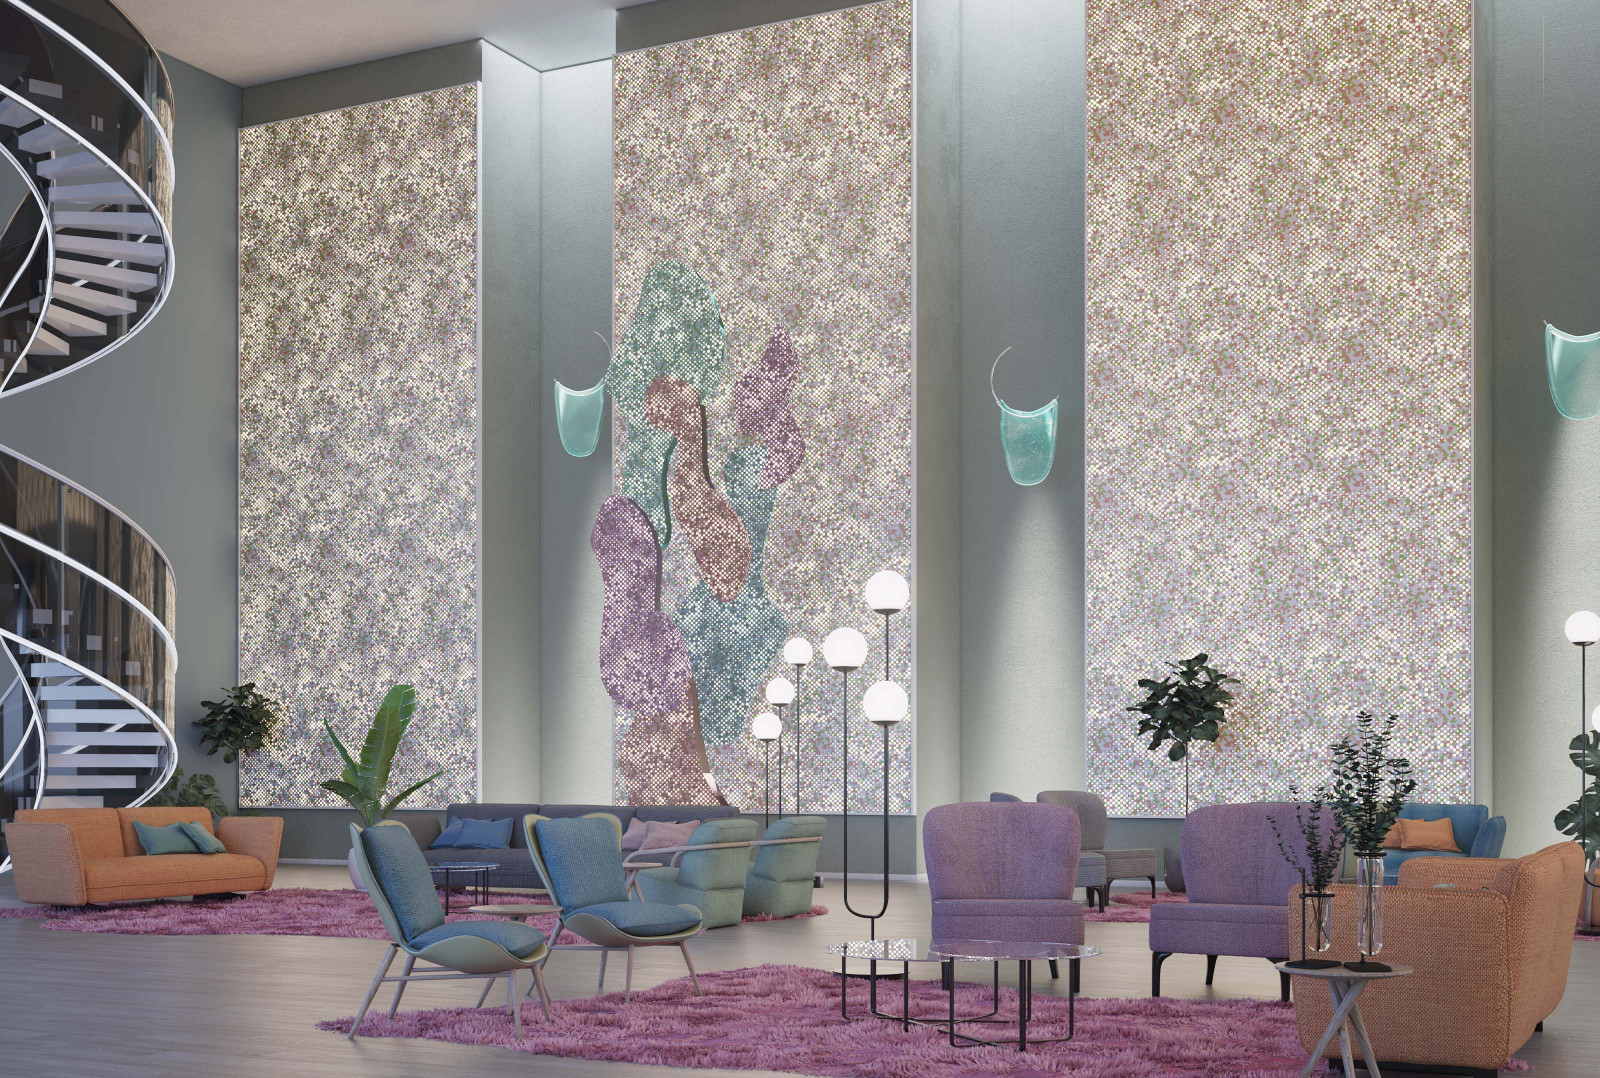  This lobby area has muted tones of purple, blue and orange furnishings with green plants scattered throughout the space. There are two purple rugs, various lights and VaporHue™ Flora panels printed and featuring Arktura Backlinting on the feature back walls. 